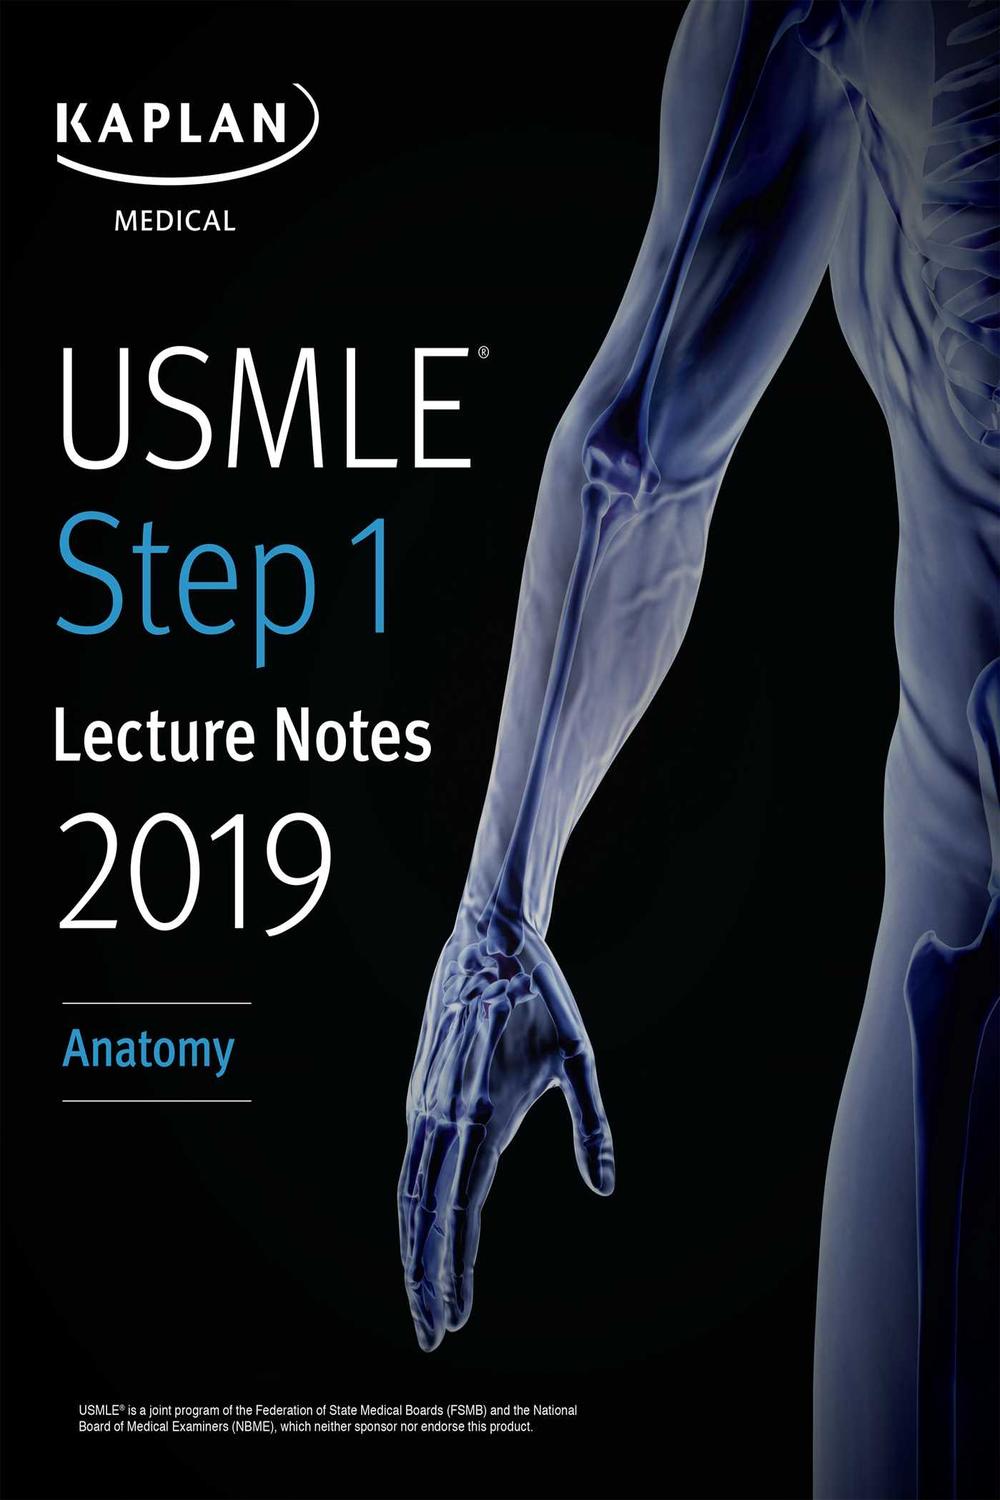 USMLE Step 1 Lecture Notes 2019: Anatomy